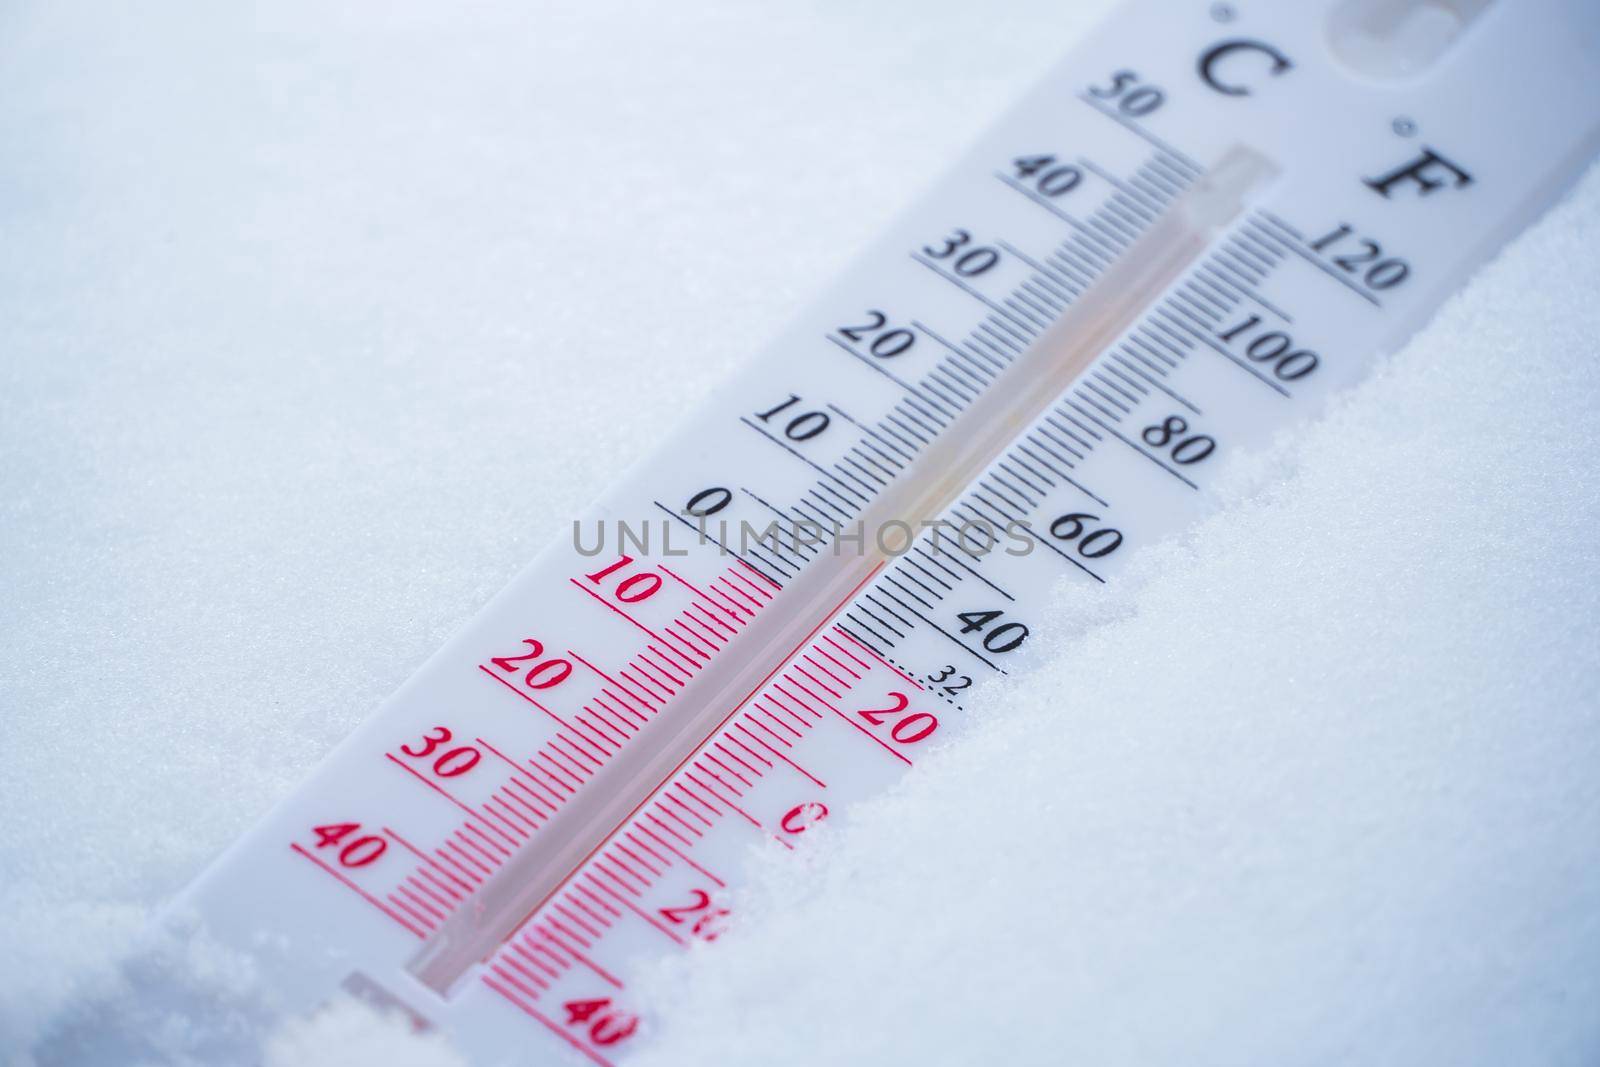 The thermometer lies on the snow in winter showing a negative temperature. Meteorological conditions in a harsh climate in winter with low air and ambient temperatures.Freeze in wintertime by YevgeniySam